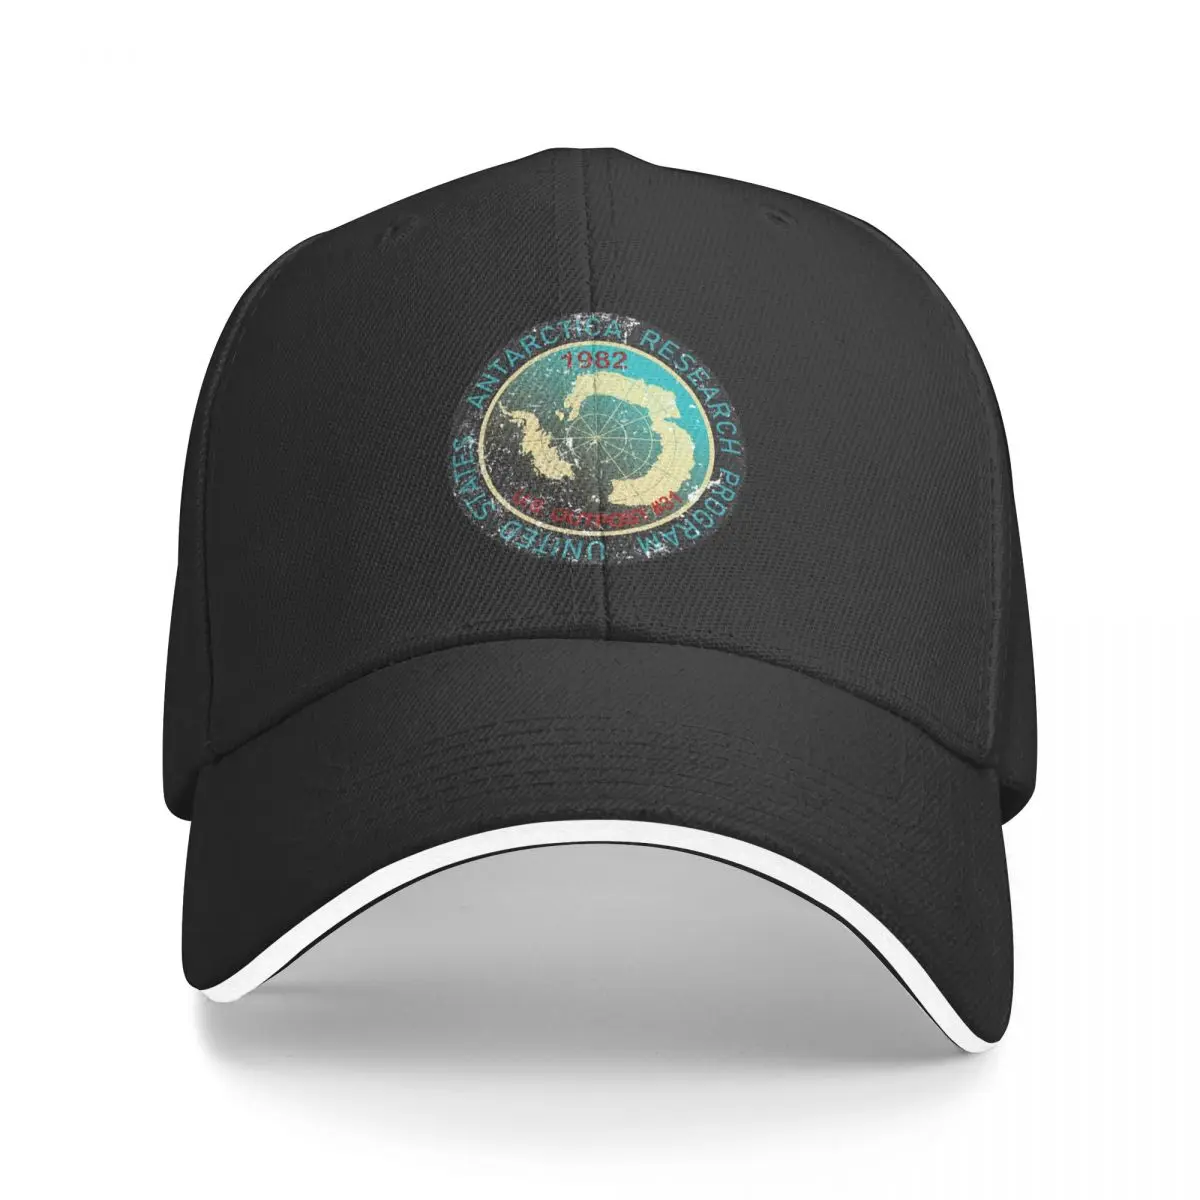 

The Thing Antarctica Research Program Outpost 31 Unisex Caps Outdoor Trucker Baseball Cap Hat Customizable Polychromatic Hats